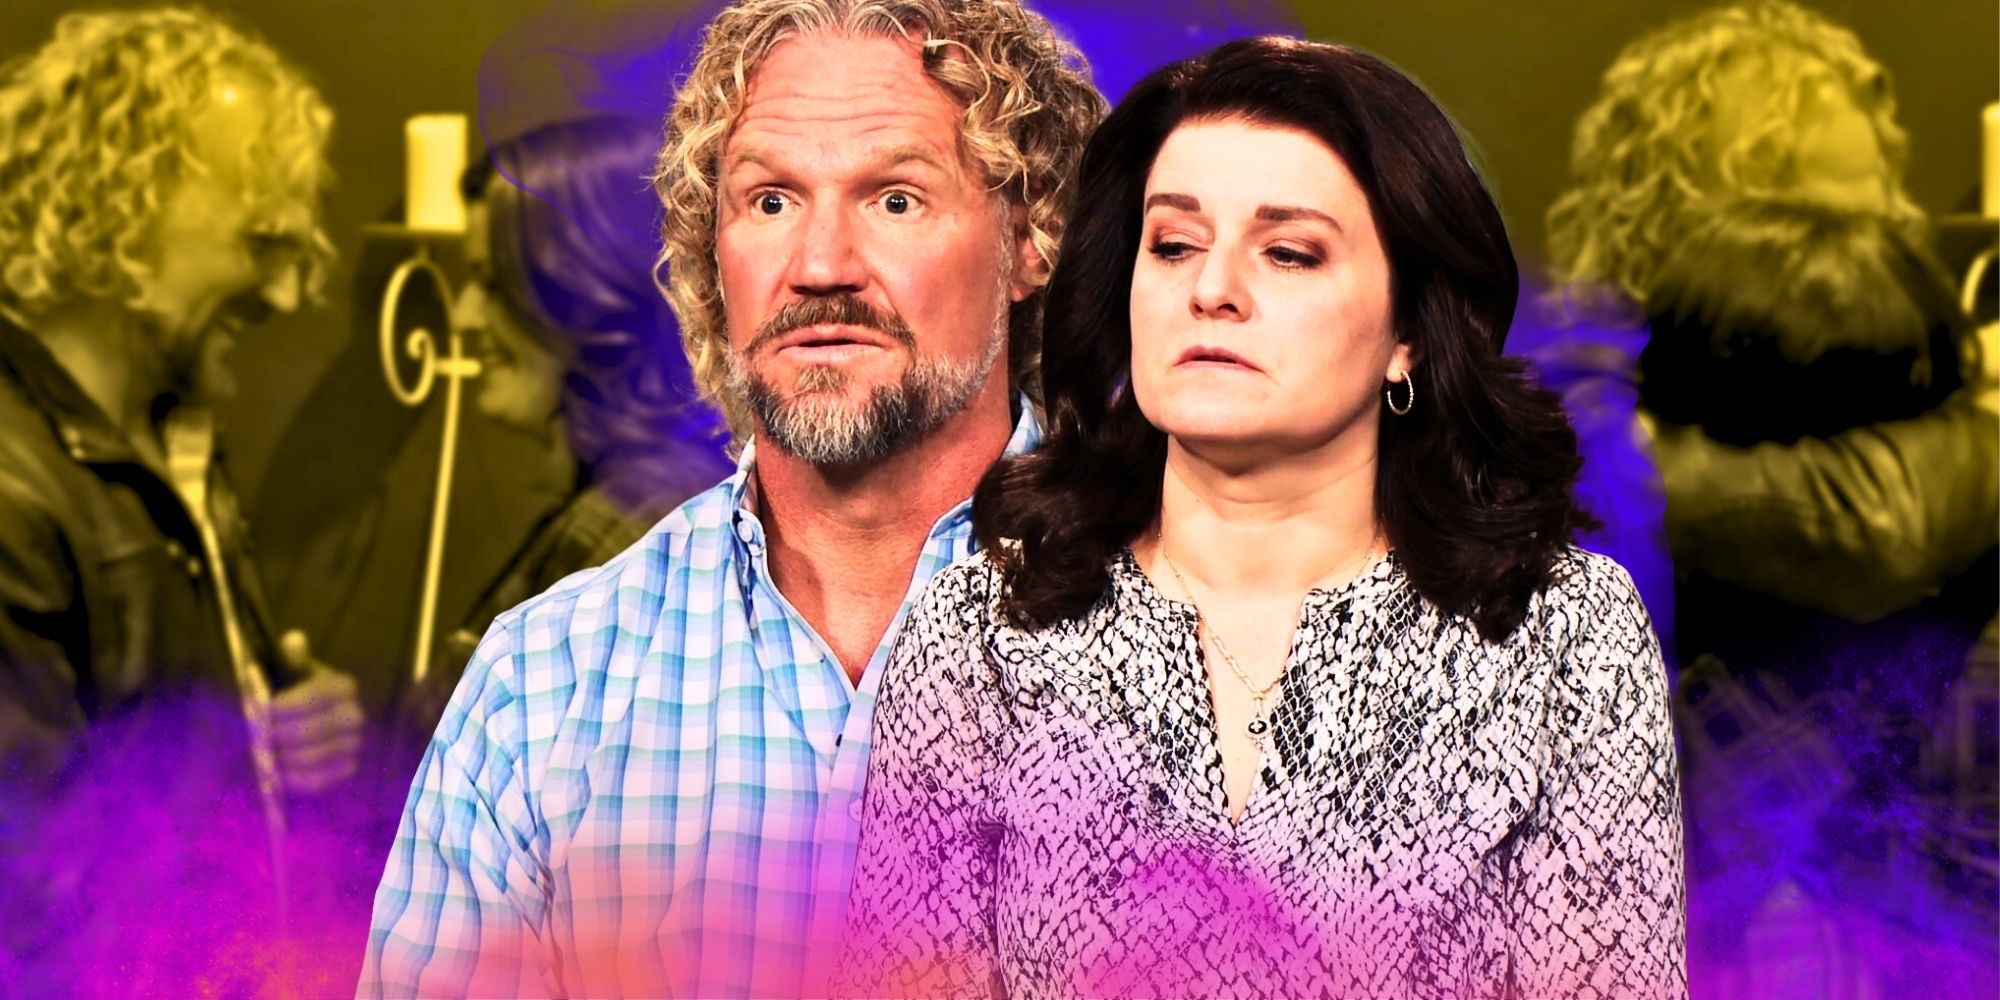 montage of Kody and Robyn from Sister Wives grey and yellow background both looking upset